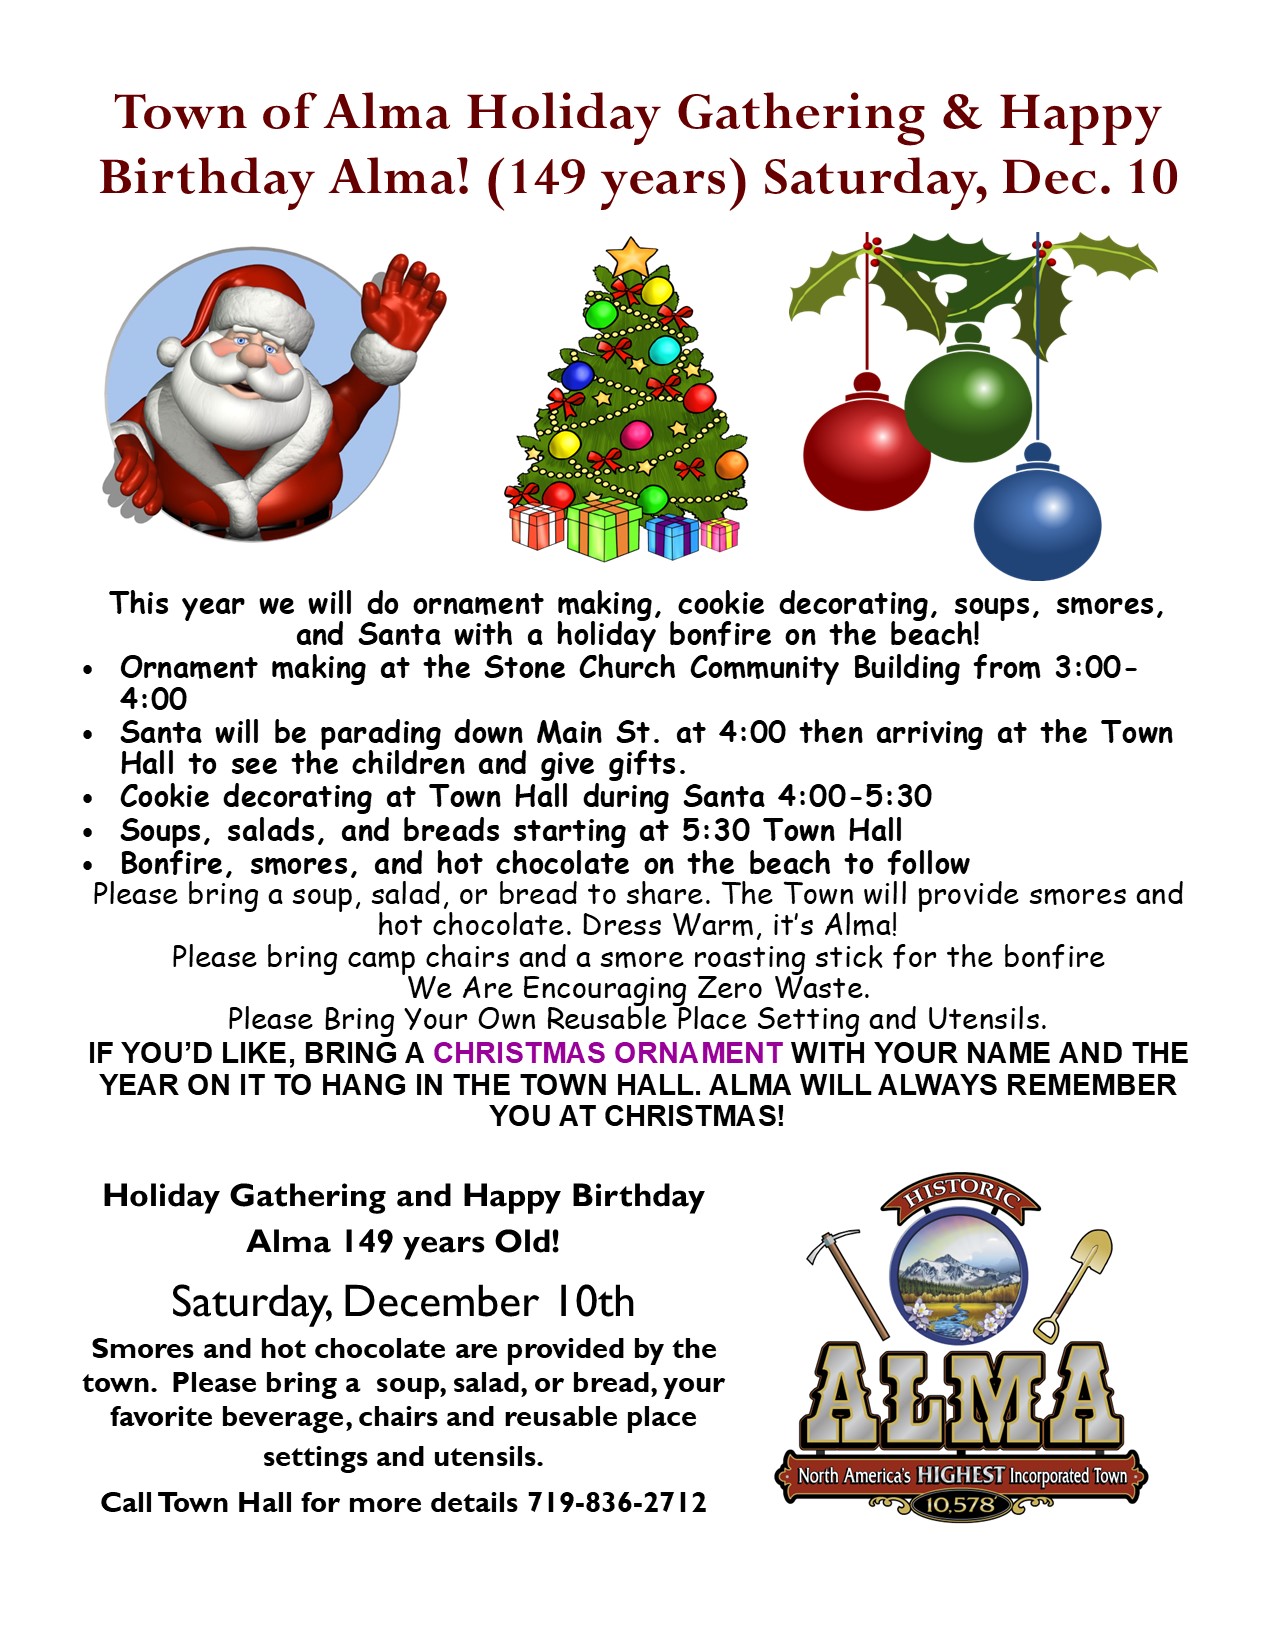 Alma Birthday and Holiday Party Flyer 2022